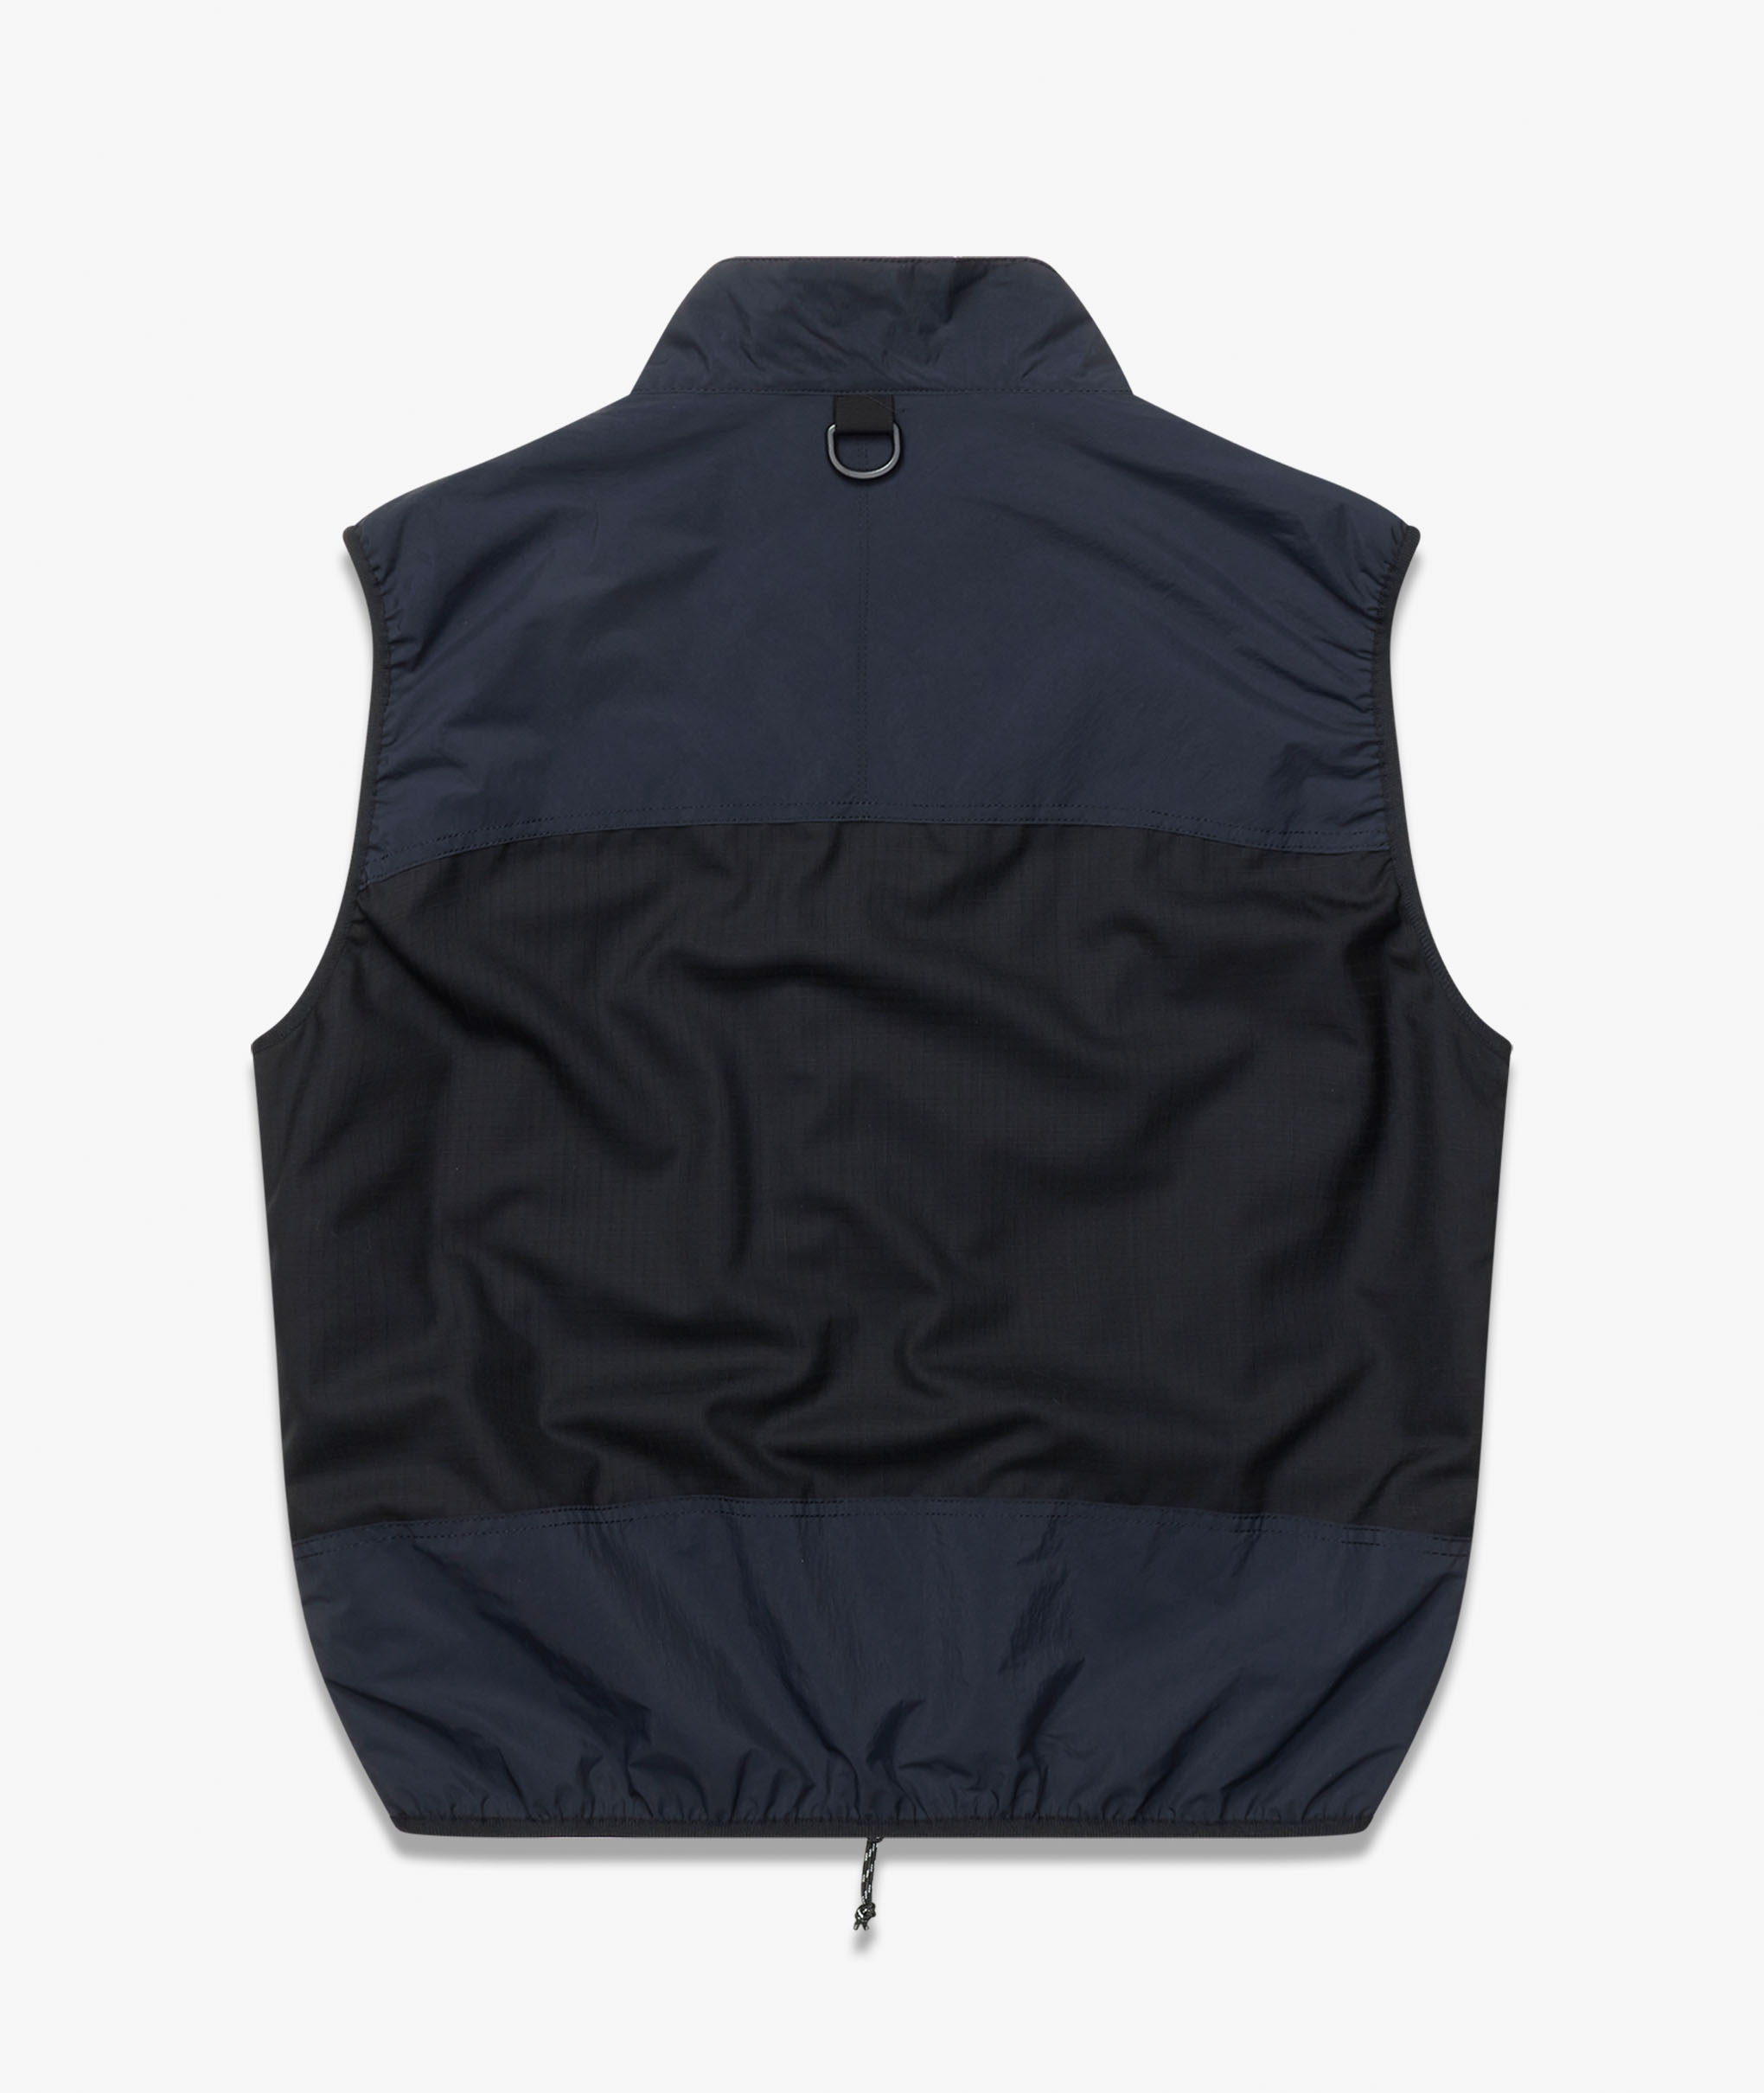 Norse Store | Shipping Worldwide - Comme Des Garcons Homme Mens 